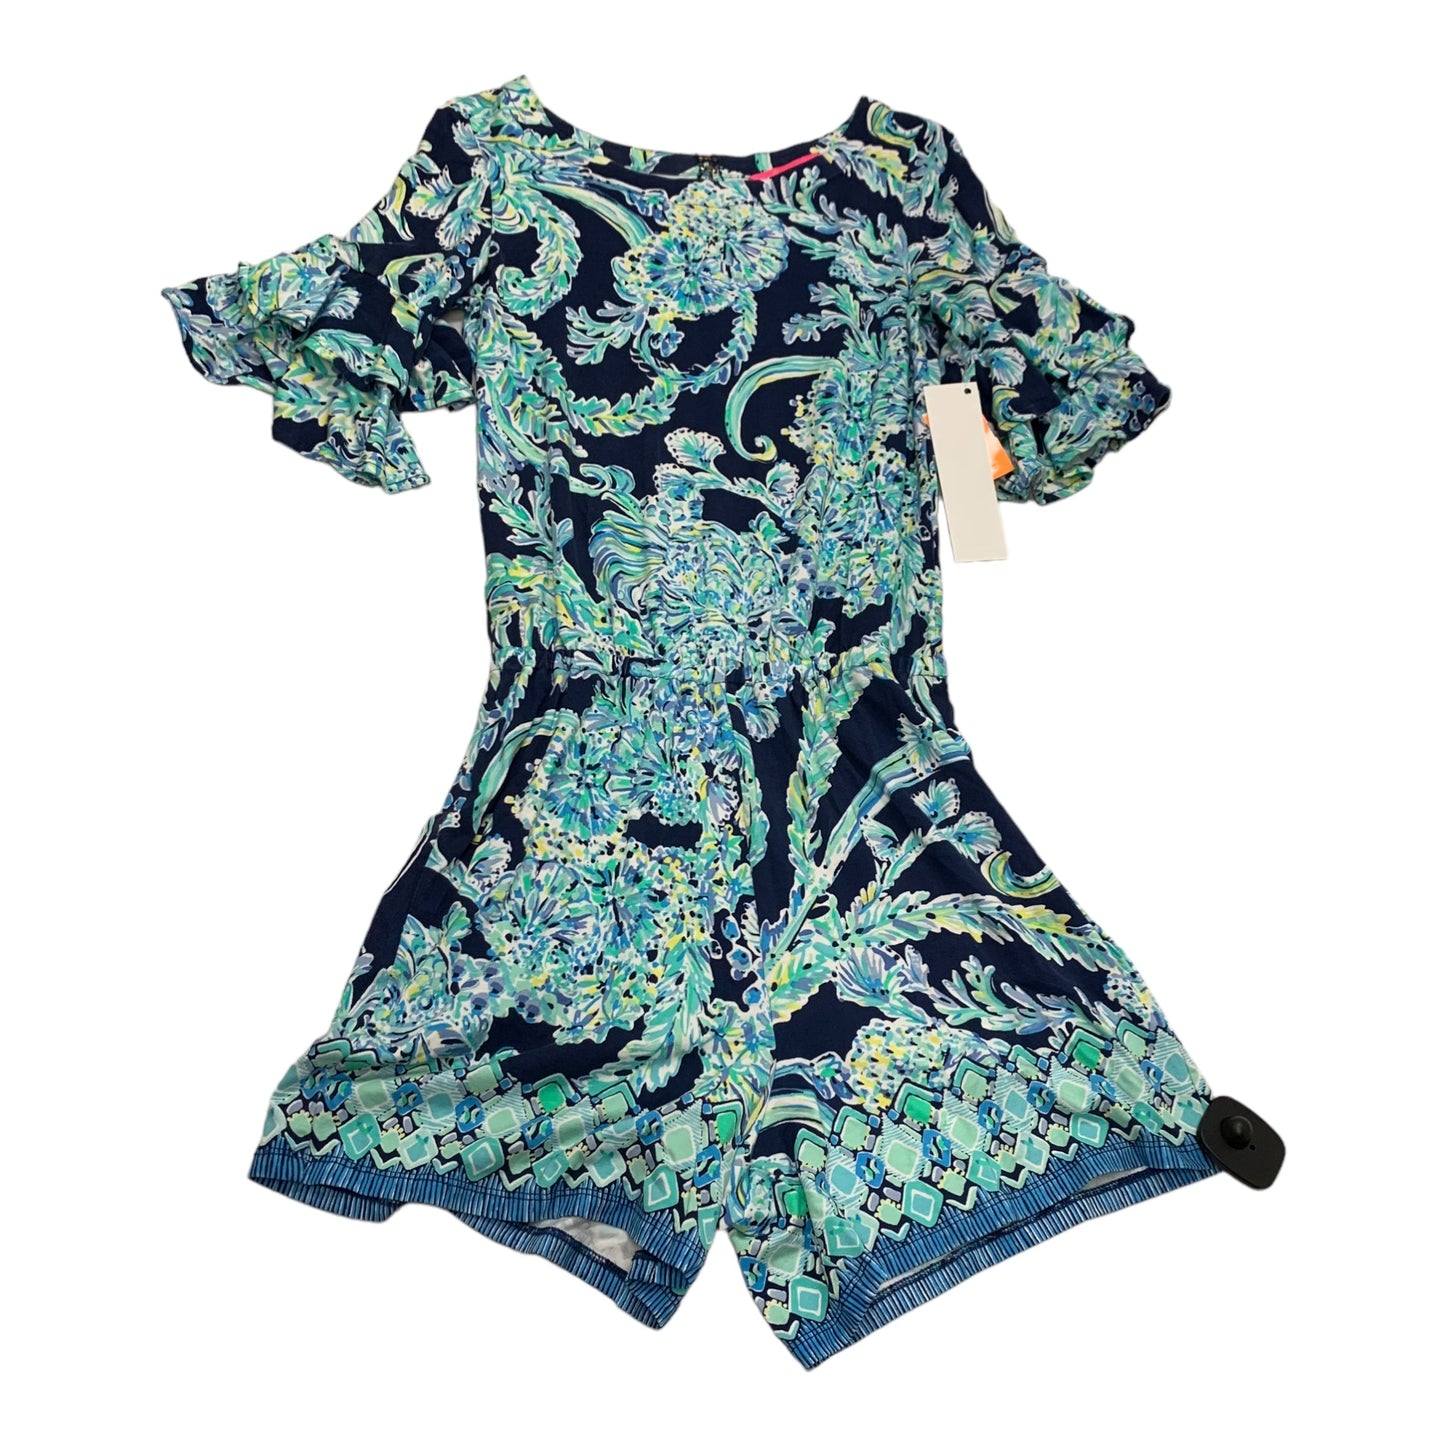 Romper Designer By Lilly Pulitzer  Size: Xxs